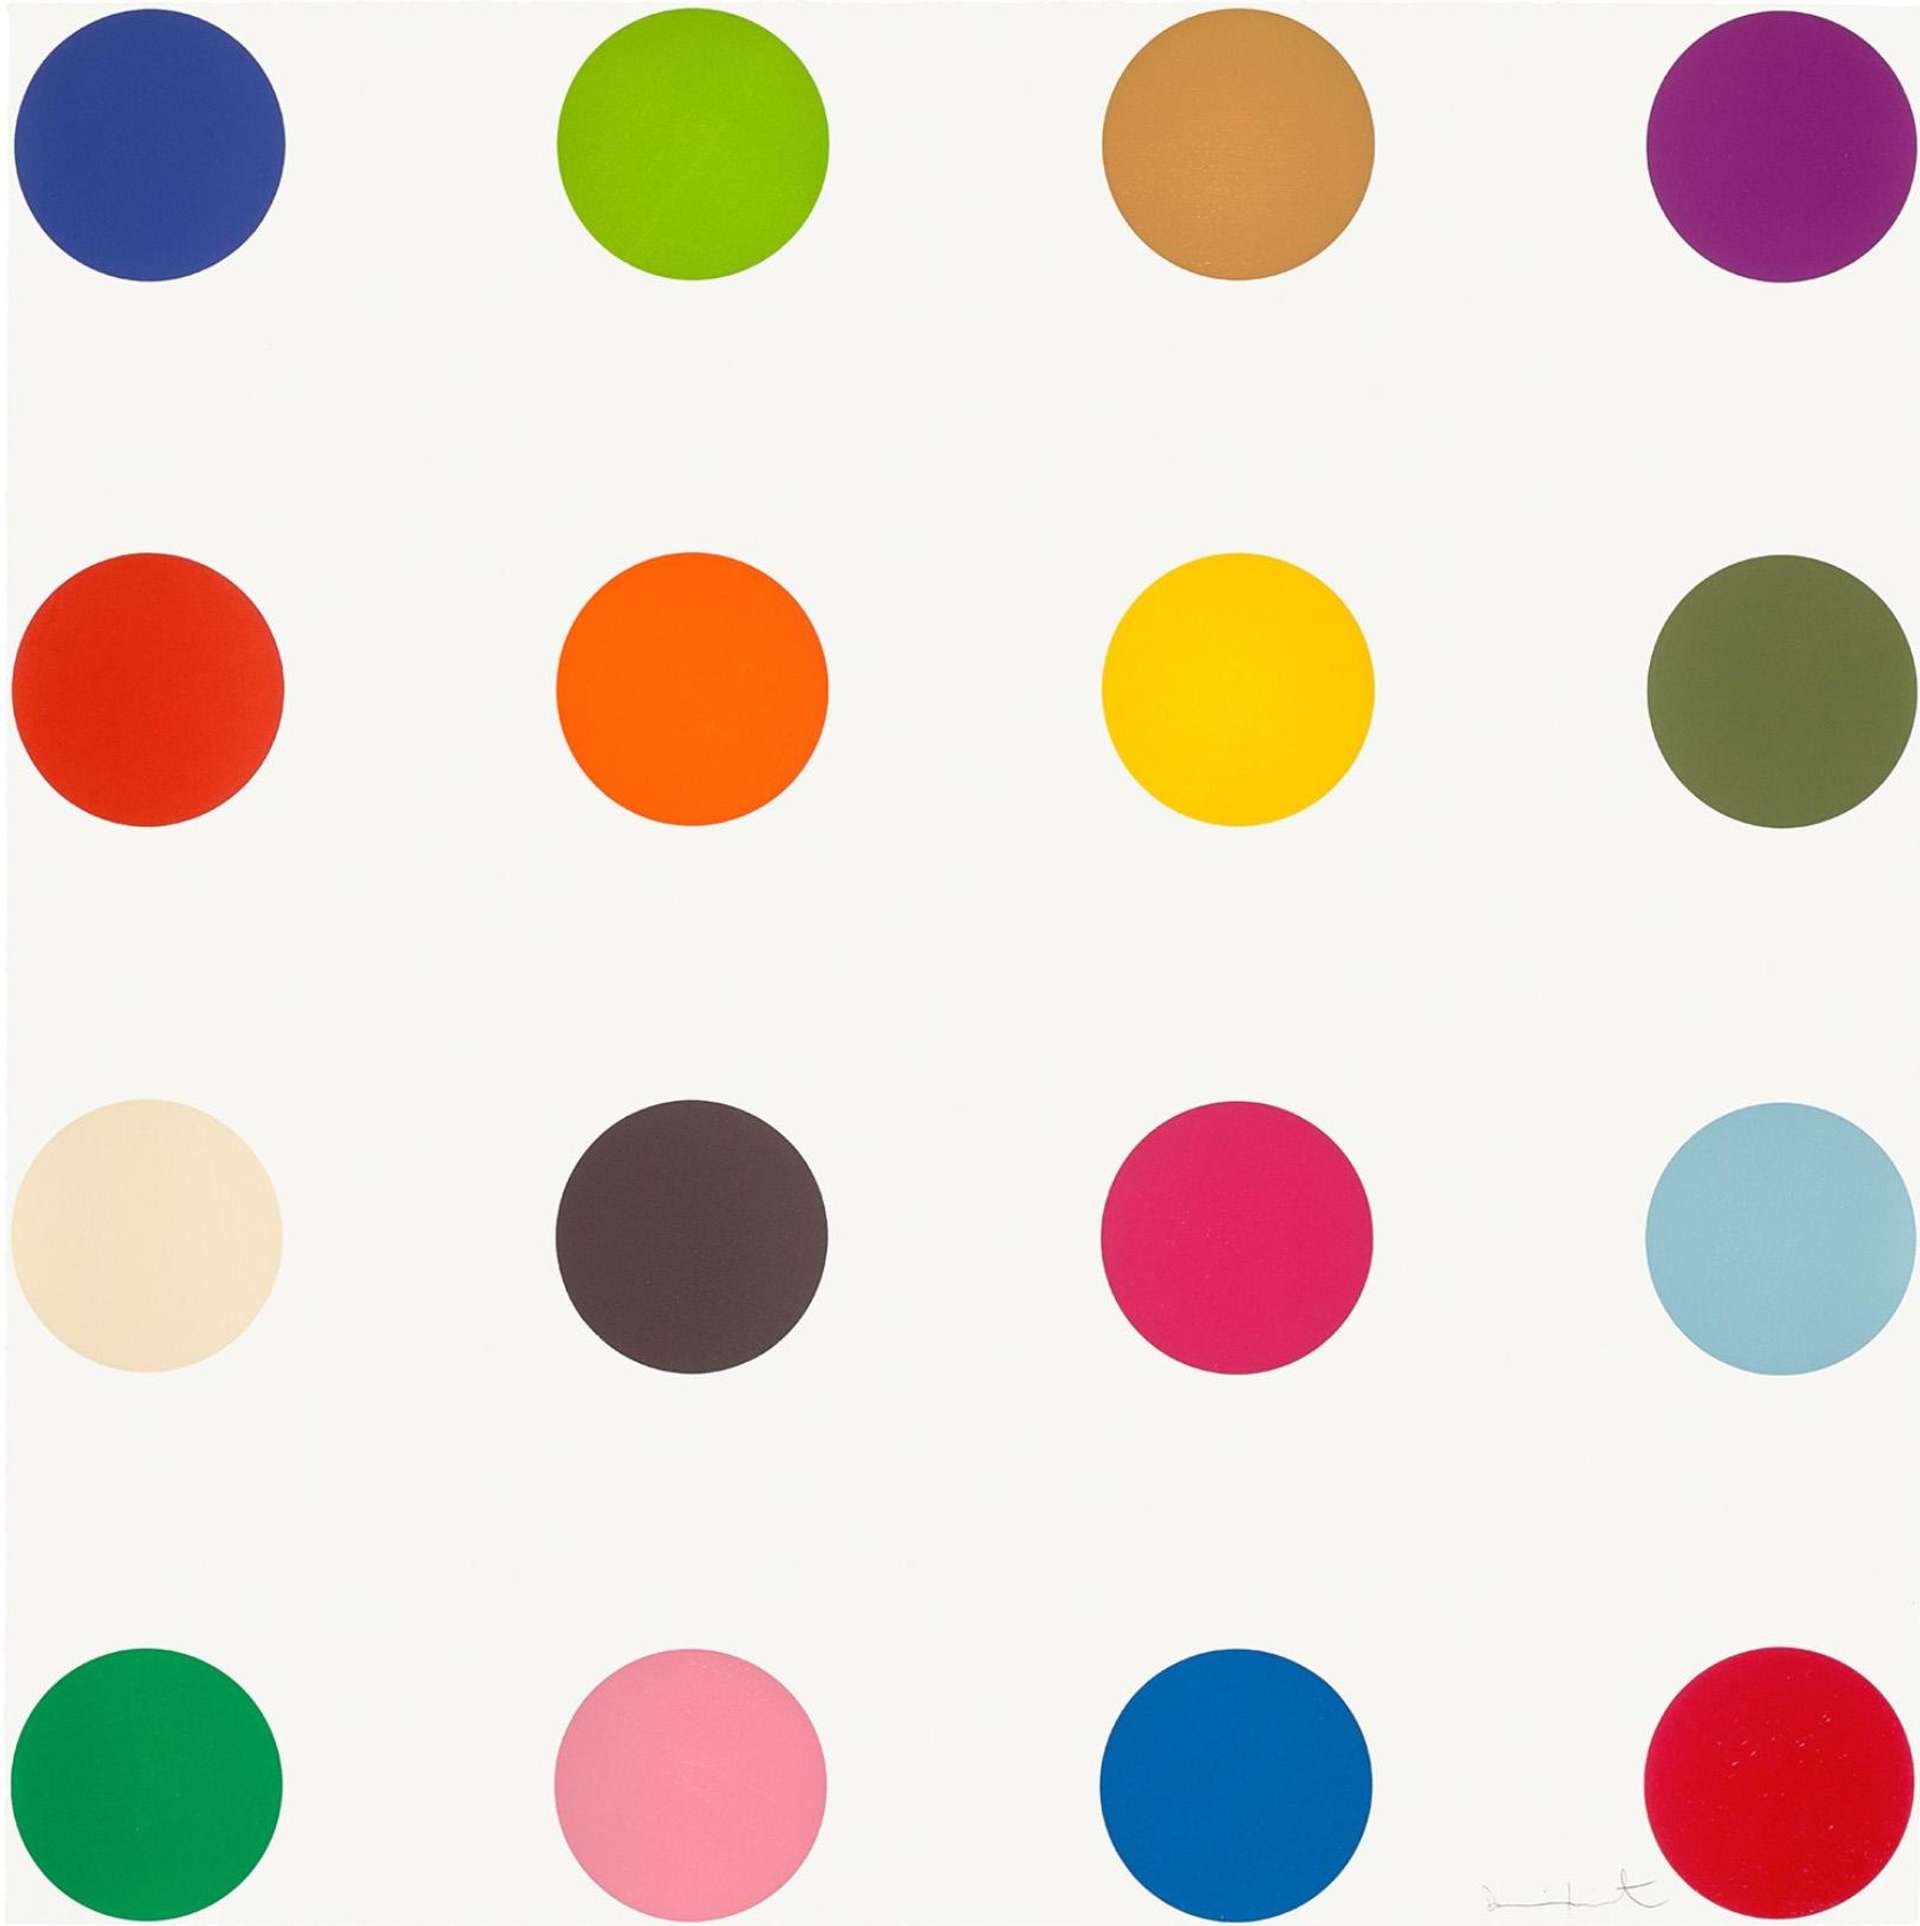 Cocarboxylase - Signed Print by Damien Hirst 2010 - MyArtBroker